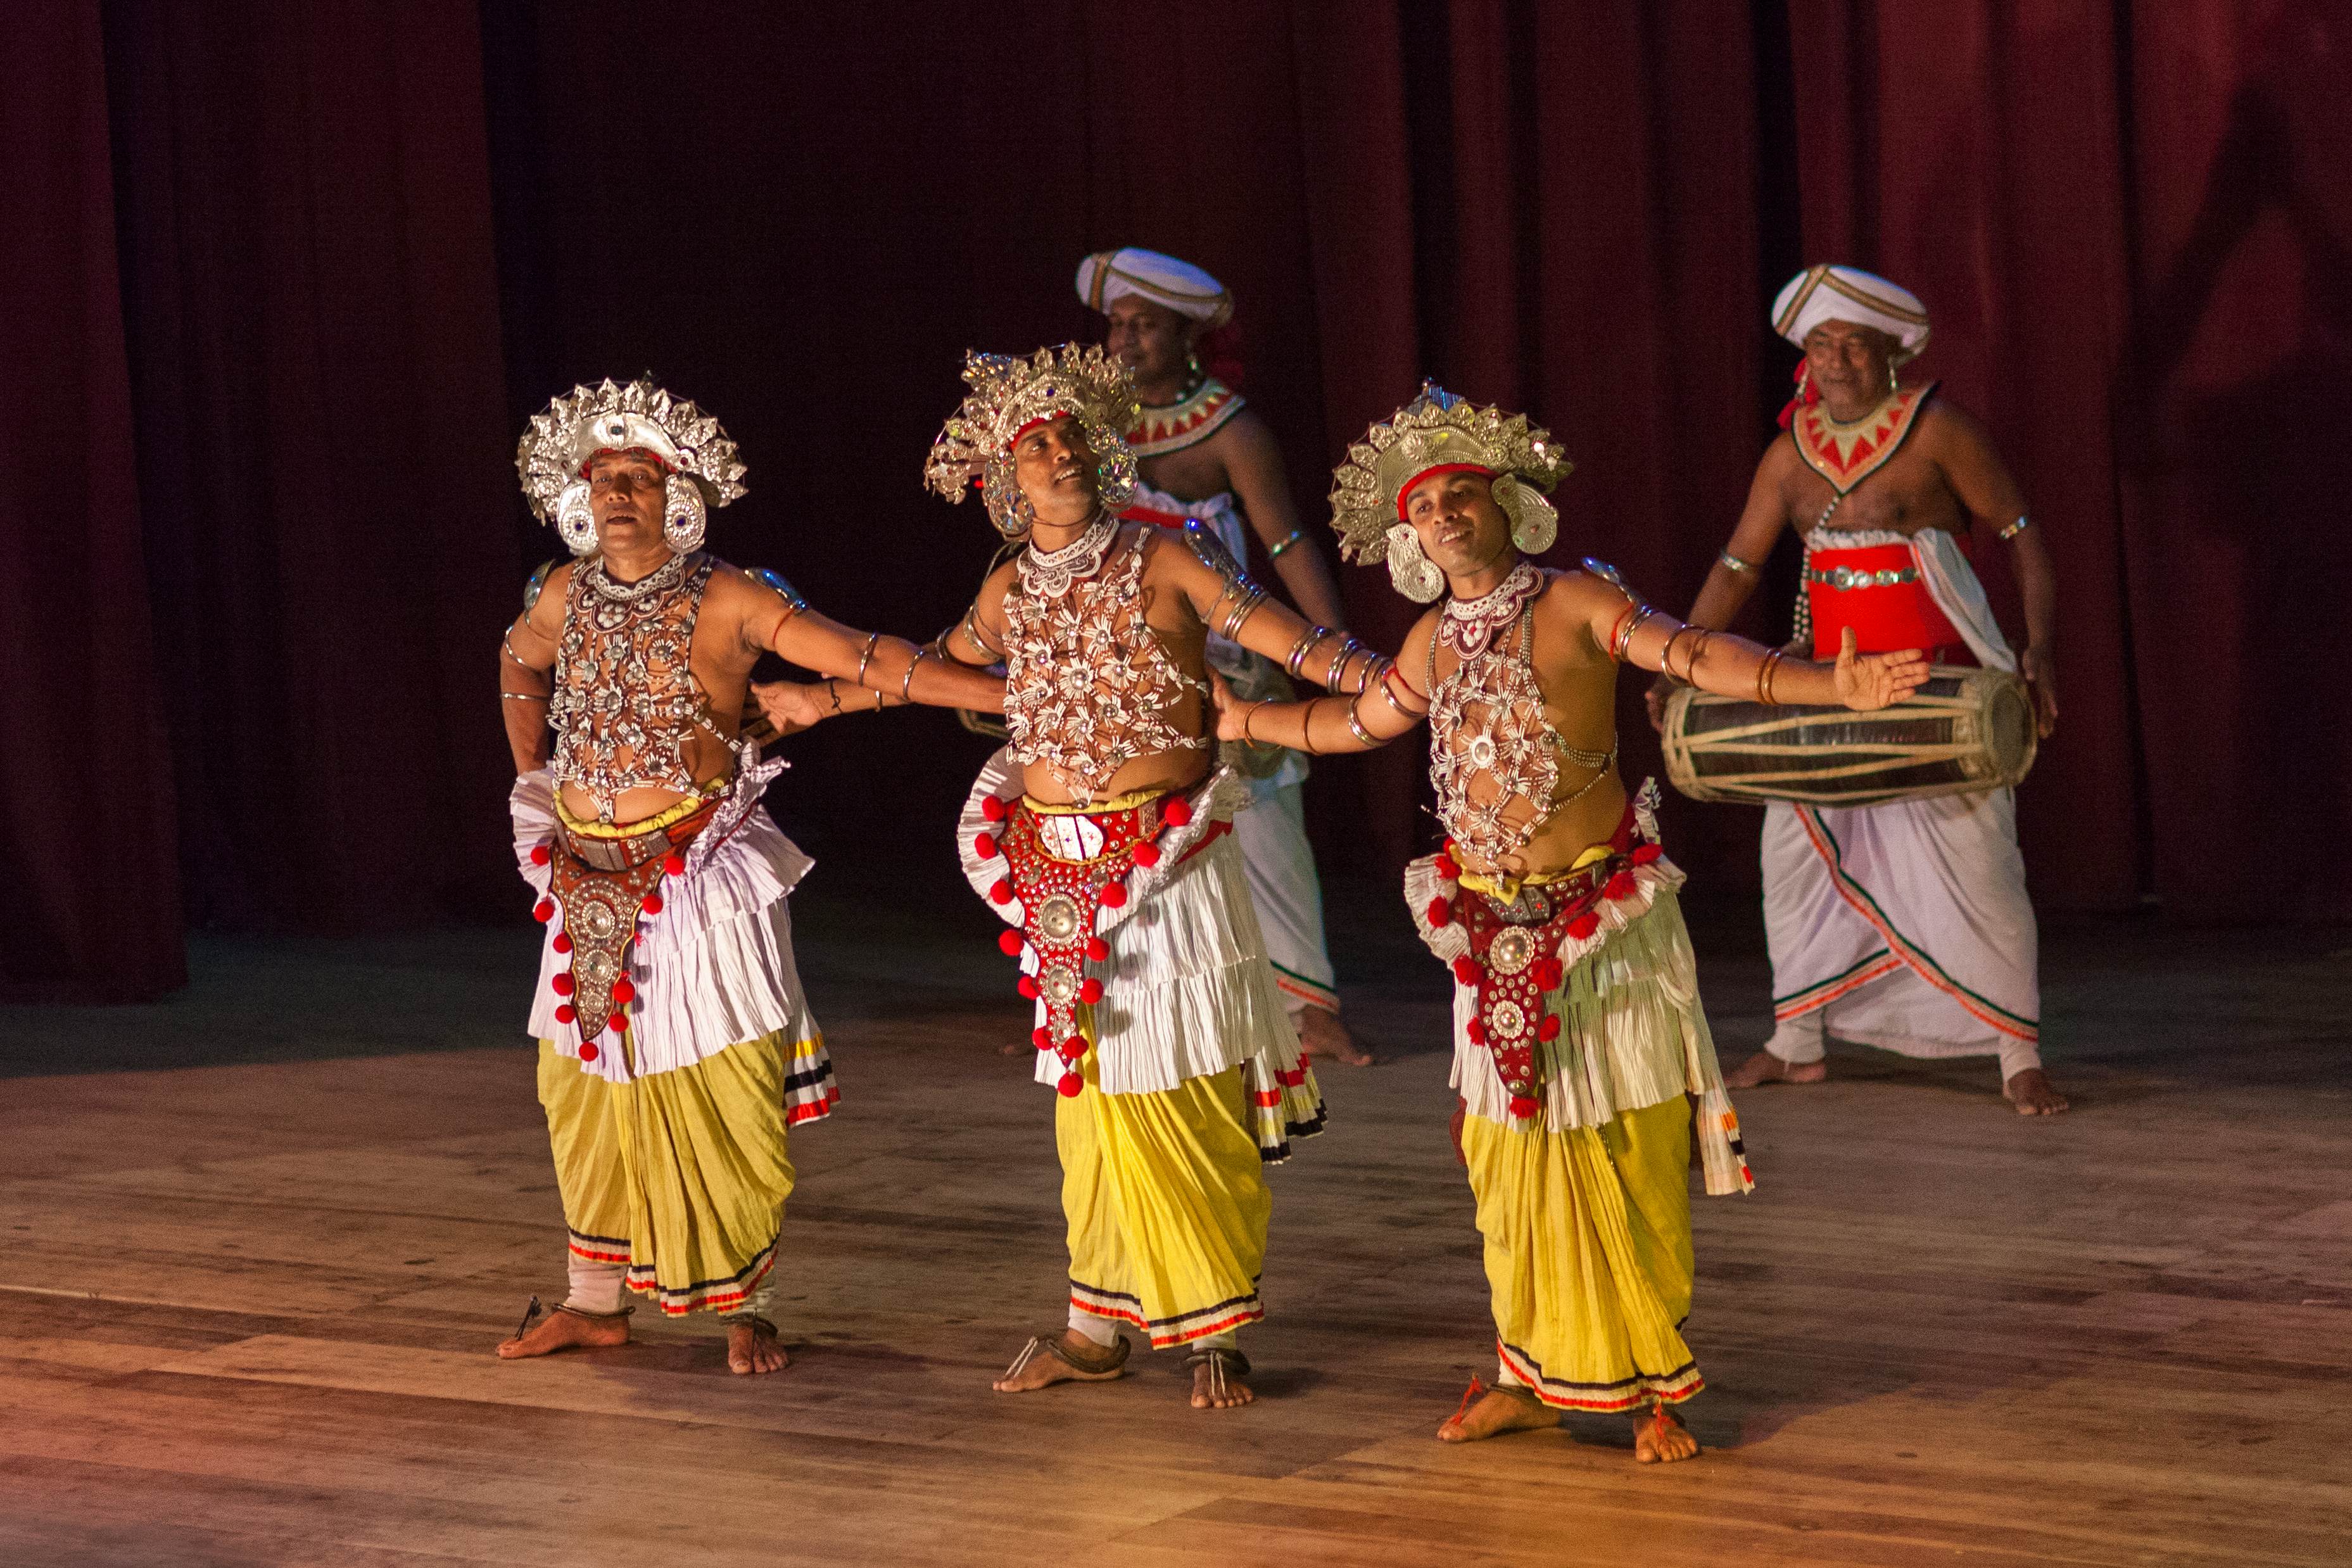 Kandy Cultural Dance- Entrance Fee 8 USD Per Person Pay Directly